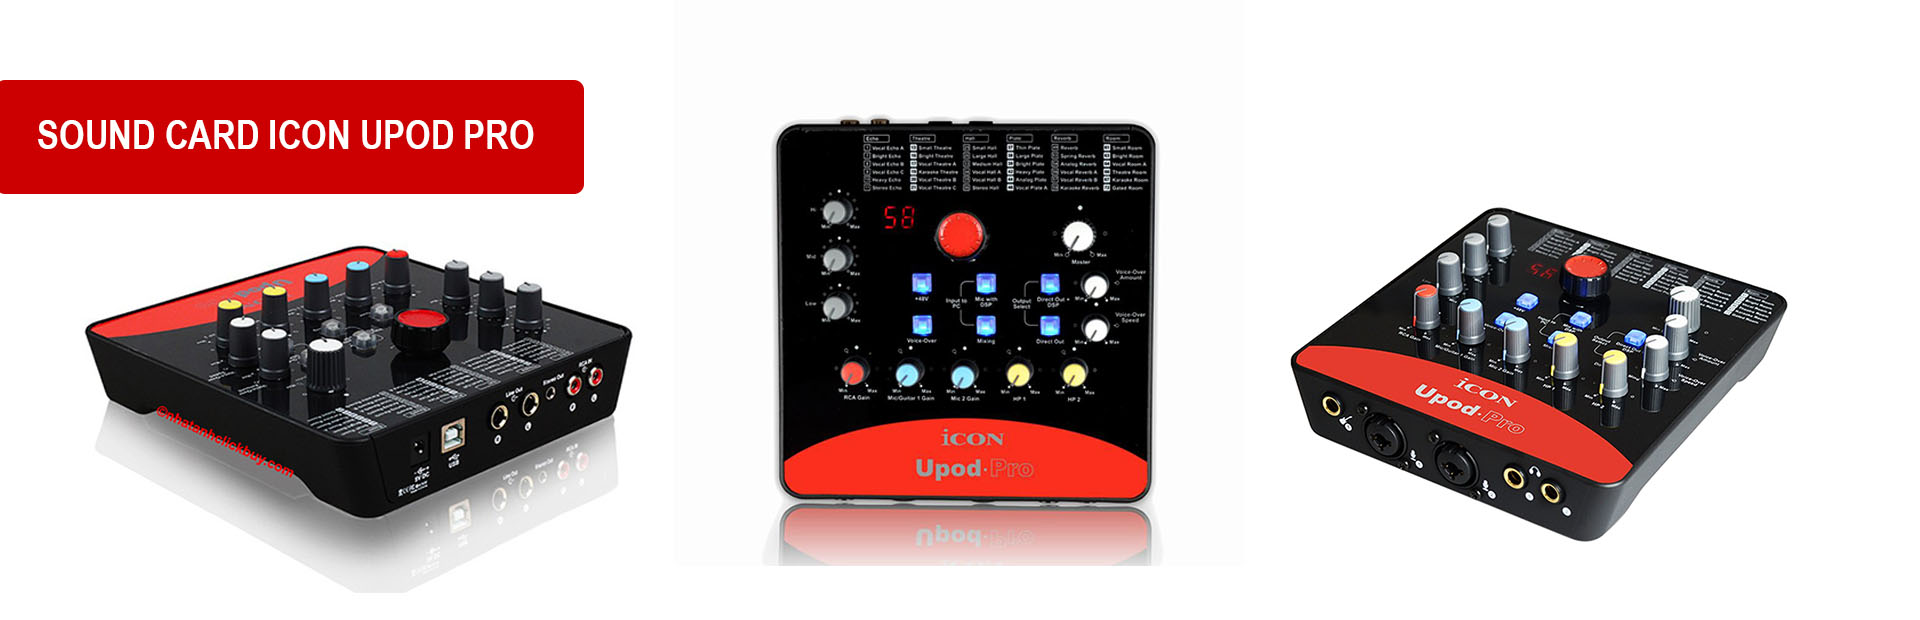 Sound card Icon Upod Pro trong combo livestream mẫu mới